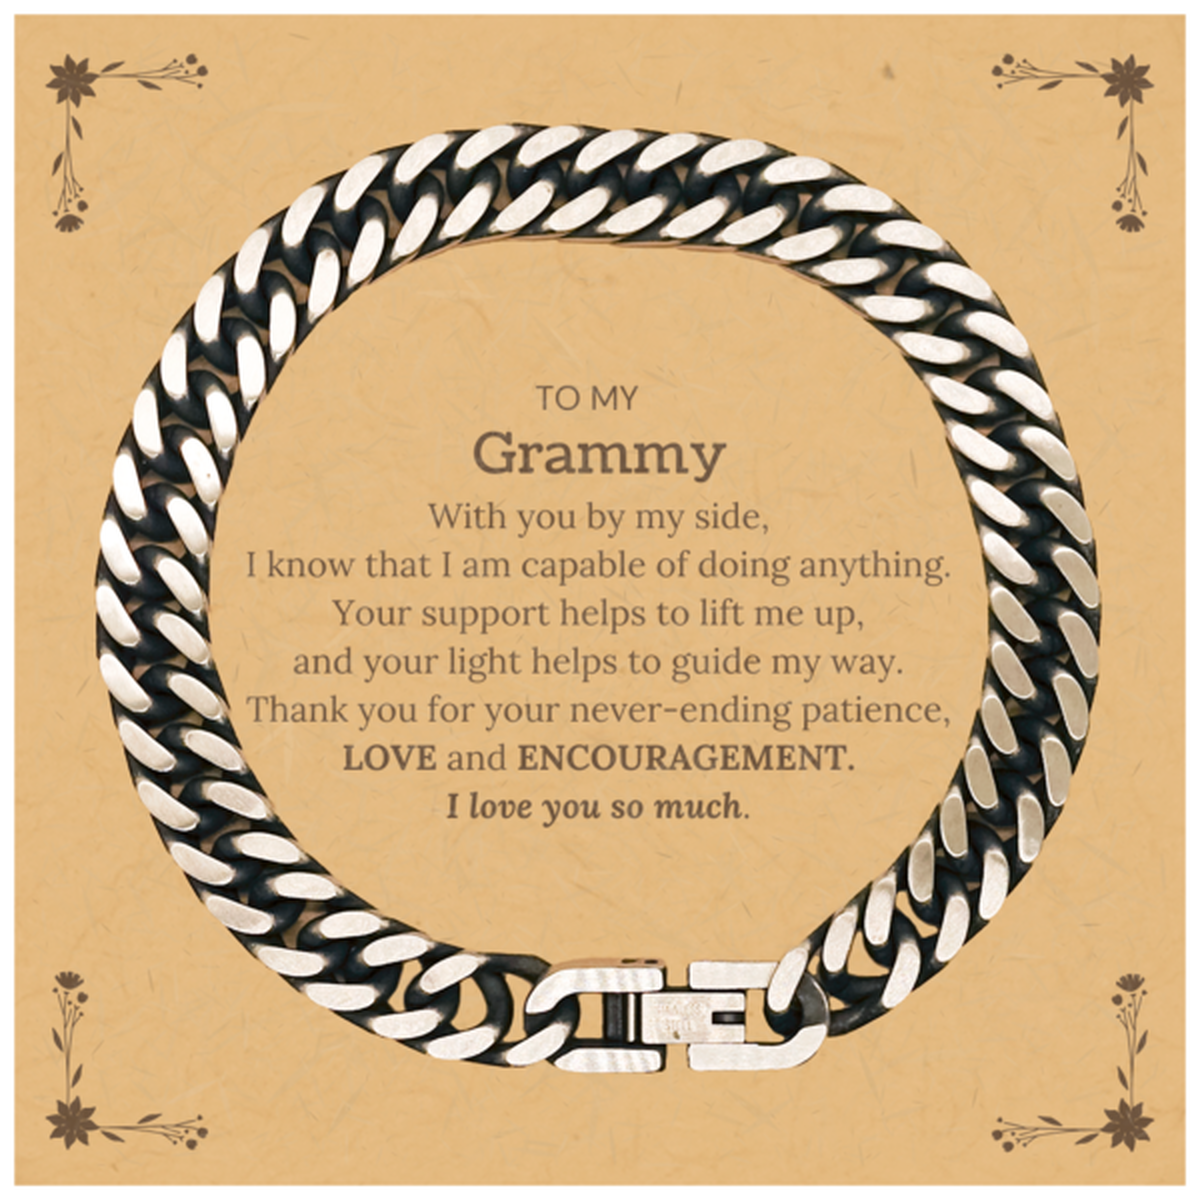 Appreciation Grammy Cuban Link Chain Bracelet Gifts, To My Grammy Birthday Christmas Wedding Keepsake Gifts for Grammy With you by my side, I know that I am capable of doing anything. I love you so much